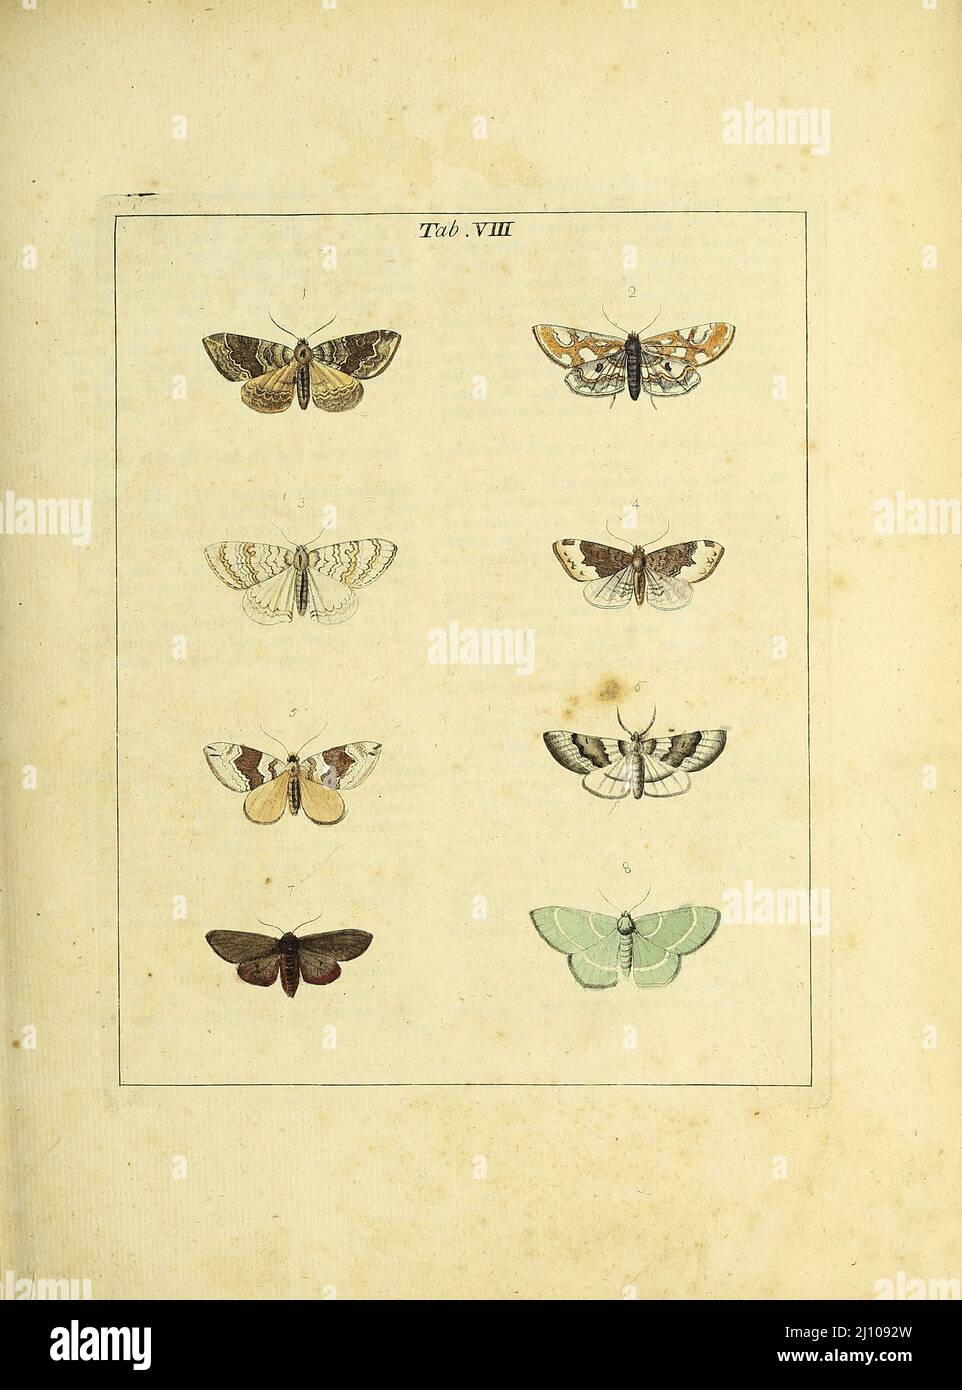 Butterflies and Moths from the book An exposition of English insects : including the several classes of Neuroptera, Hymenoptera, & Diptera, or bees, flies, & Libellulae : exhibiting on 51 copper plates near 500 figures, accurately drawn & highly finished in colours, from nature : the whole minutely described, arranged & named, according to the Linnean system, with remarks : the figures of a great number of moths not in the Aurelian collection : formerly published by the same author and a plate with an explanation of colours, are likewise given in the work by  Moses Harris, 1730 - 1788, author Stock Photo